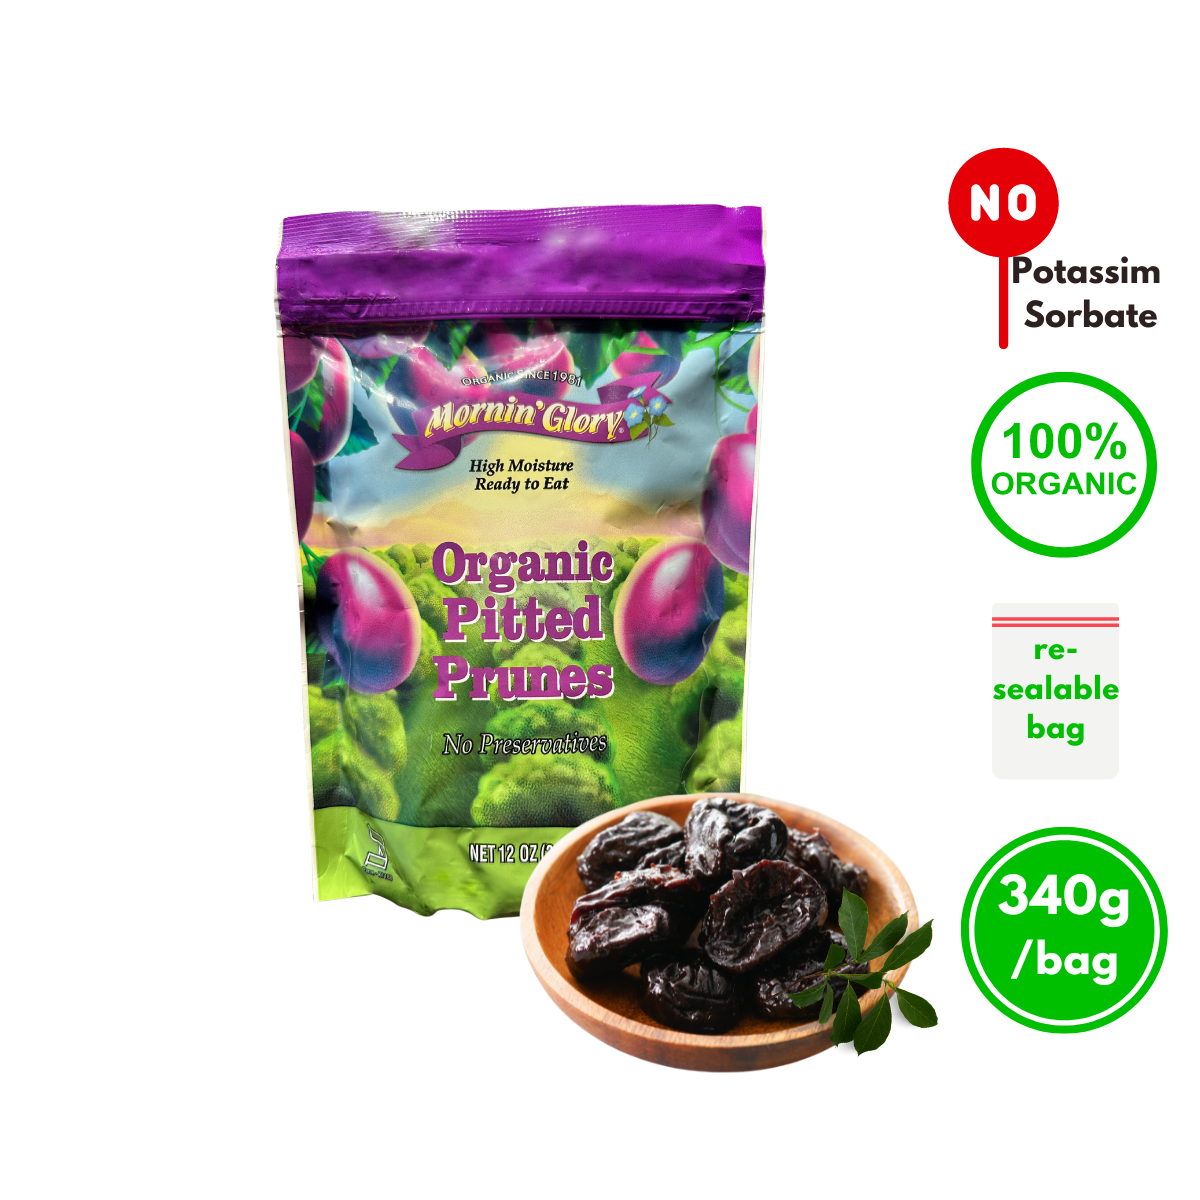 【Mornin'Glory 】Organic Pitted Prunes 340g | Non-sorbate | 100% Pure Organic | Healthy snacks for constipation| Best Taste